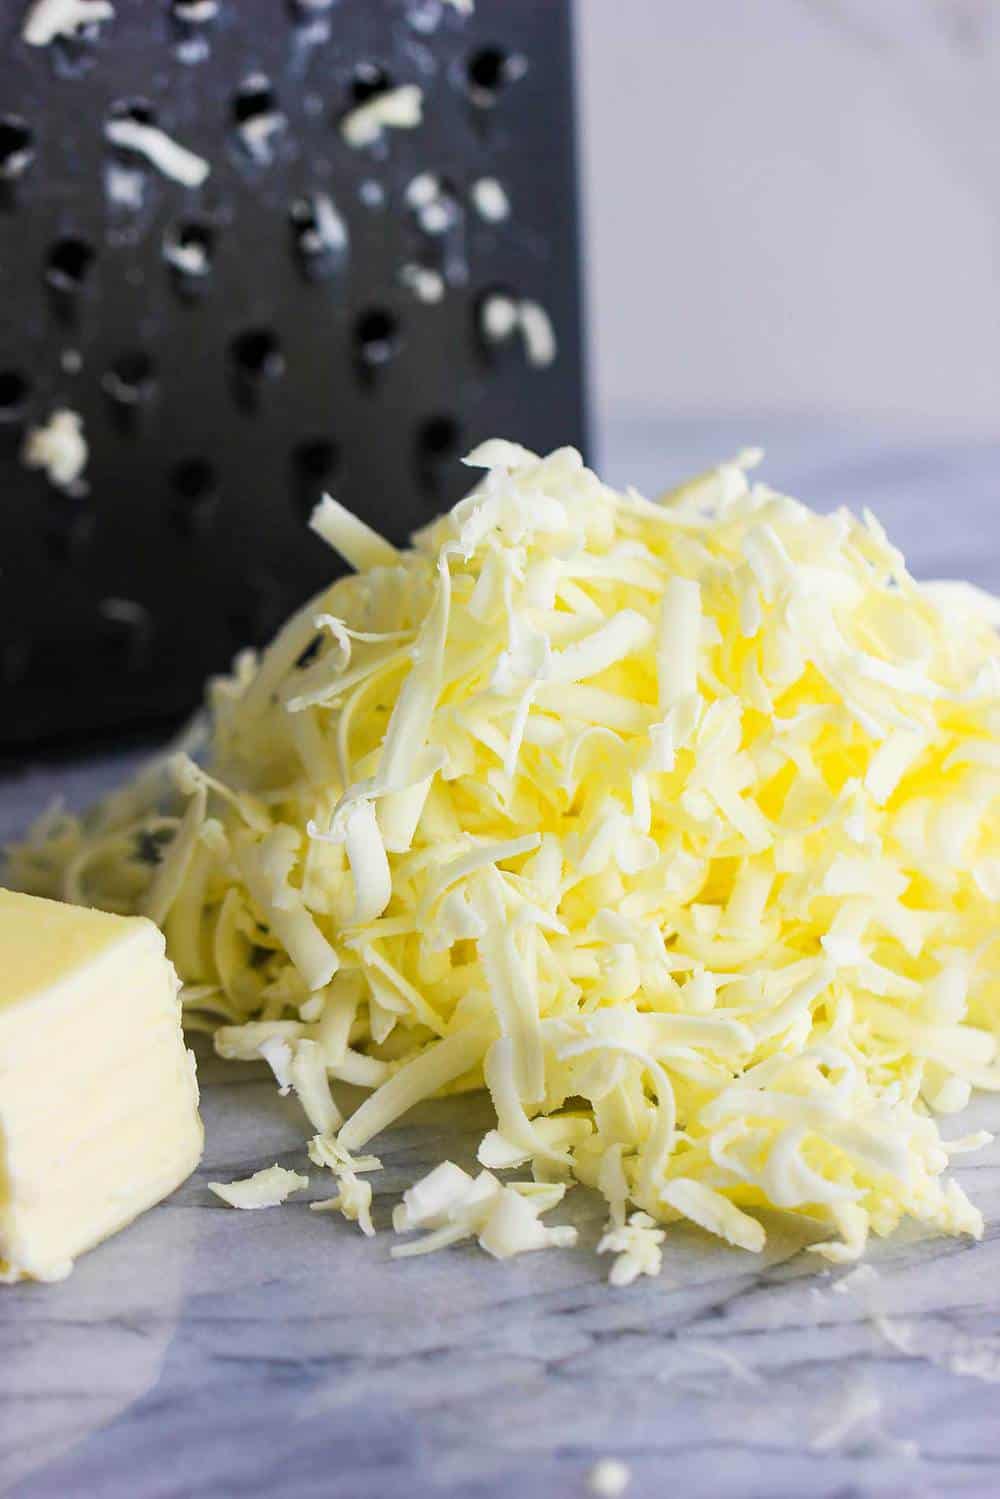 Grated butter next to a box grater